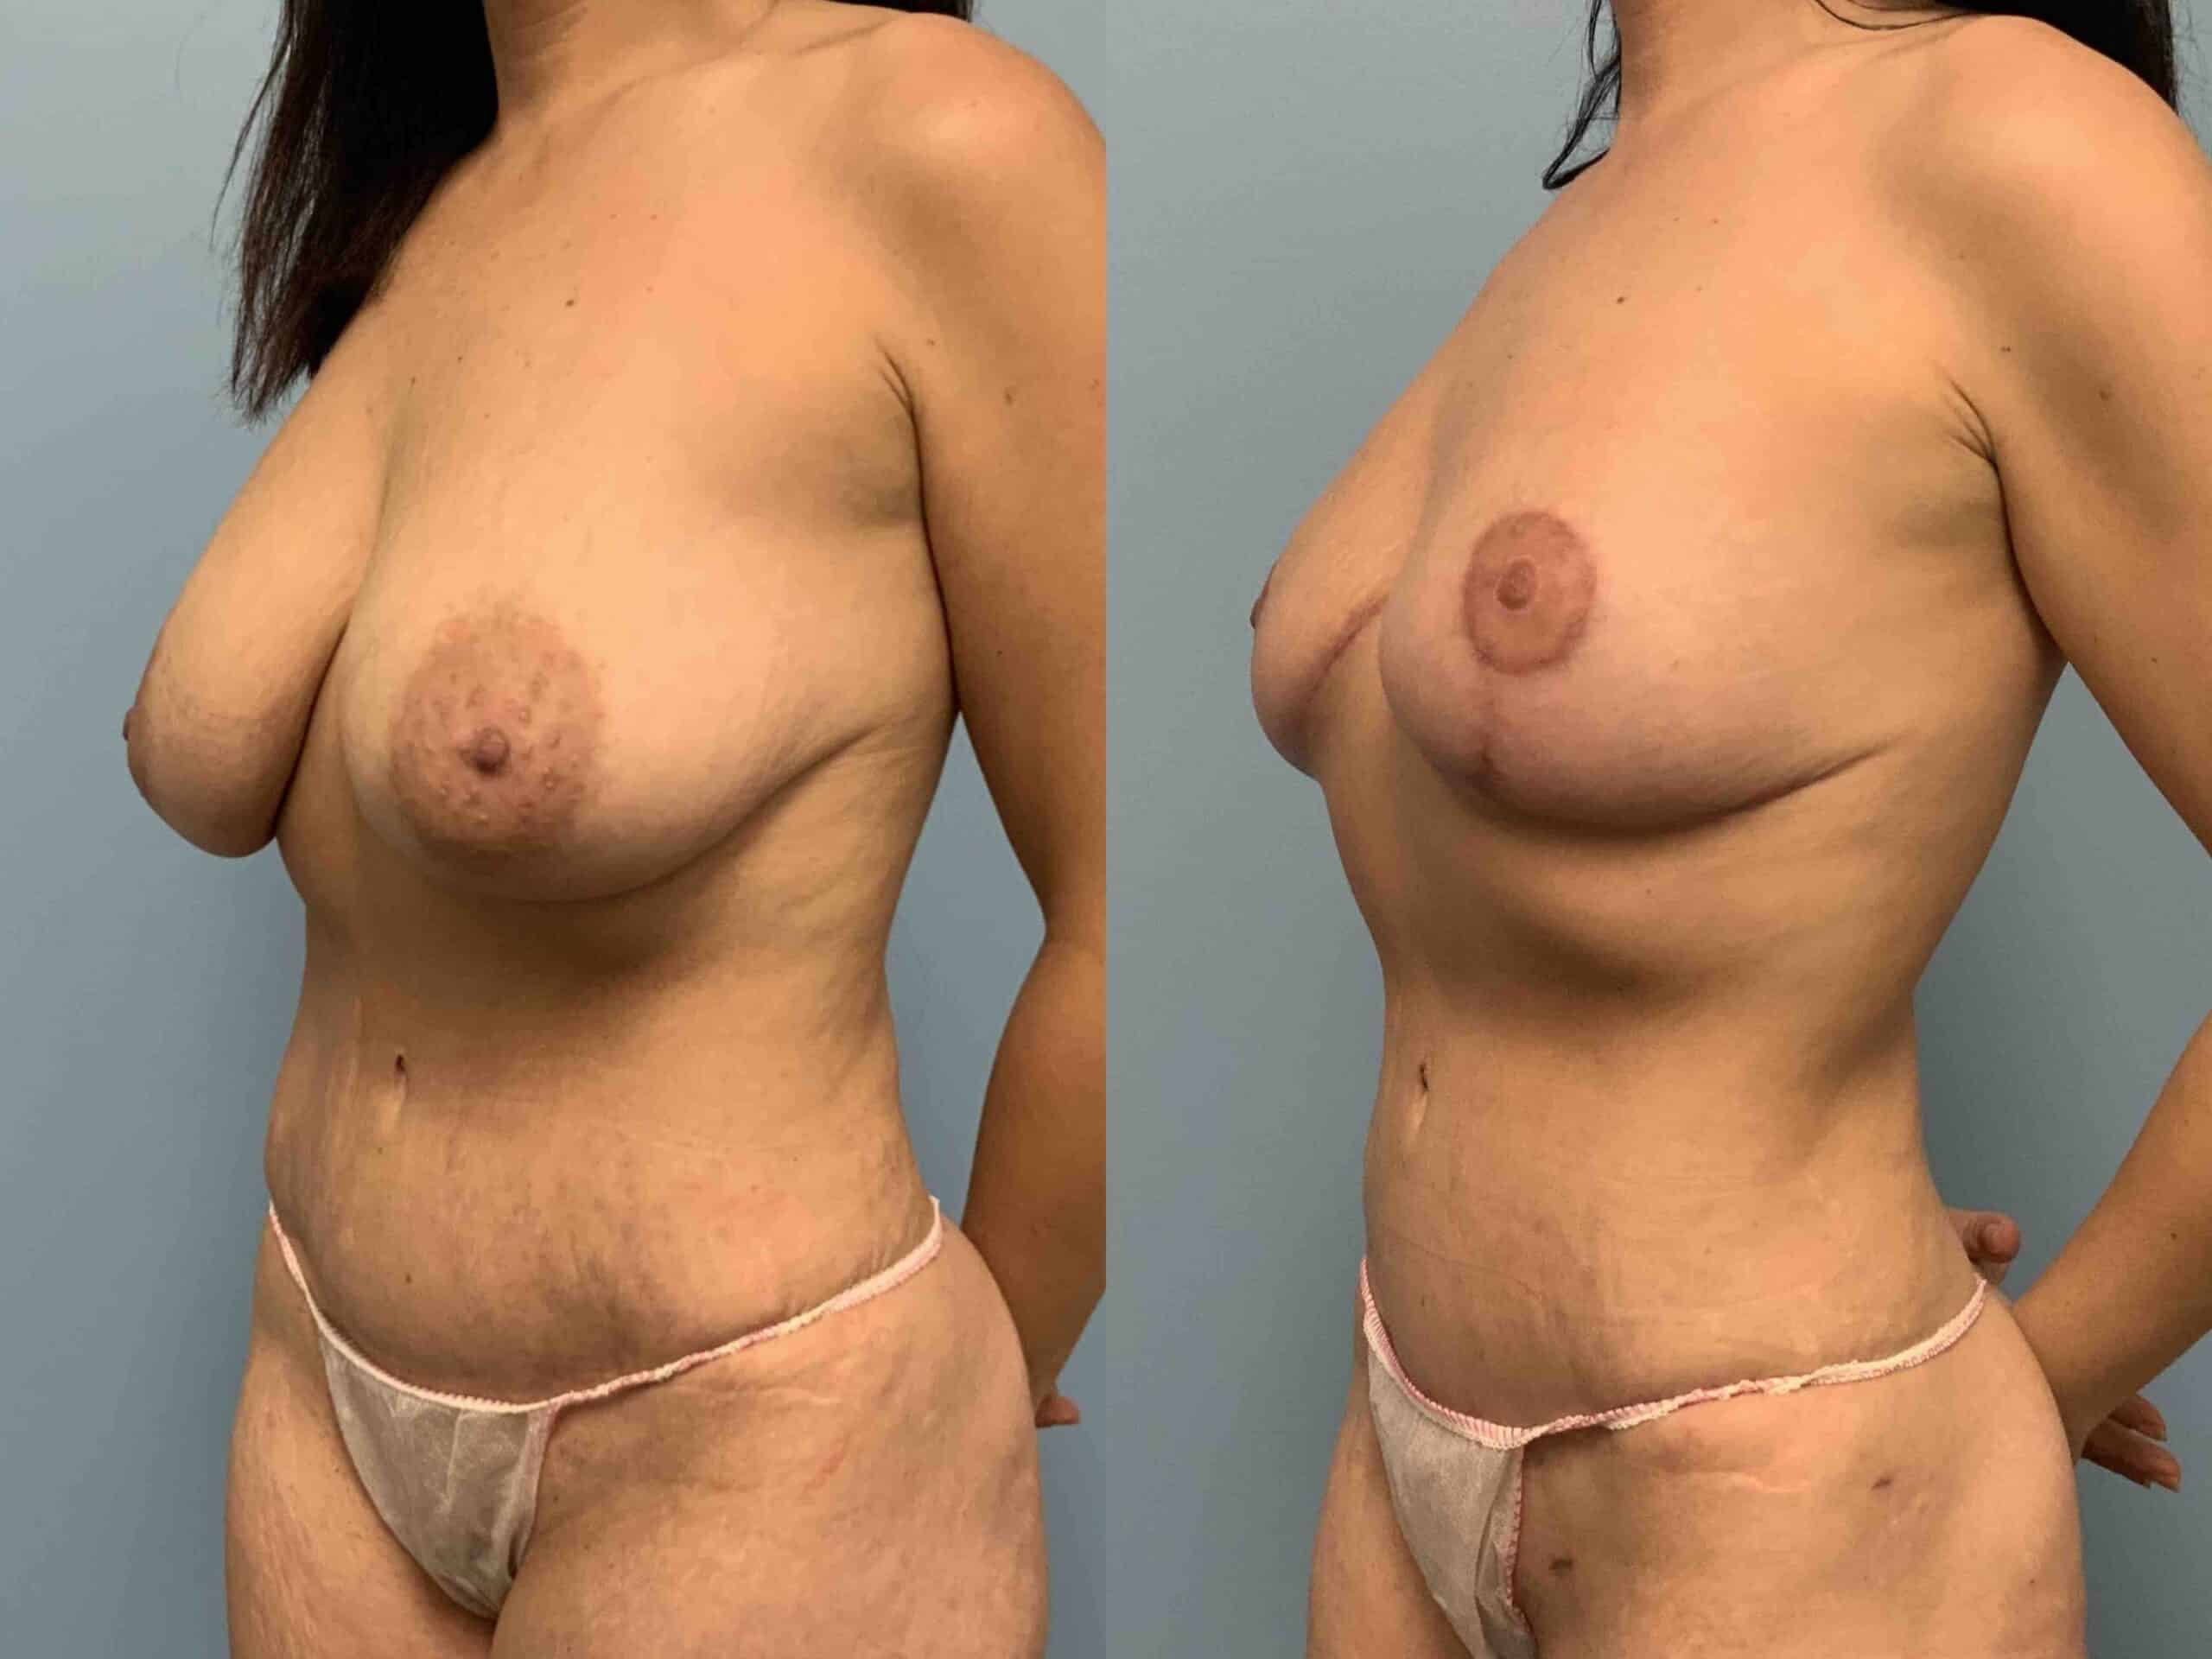 Before and after, patient 3 mo post op from Breast Reduction, VASER Abdomen and Flanks, Axillary Roll Reselection procedures performed by Dr. Paul Vanek